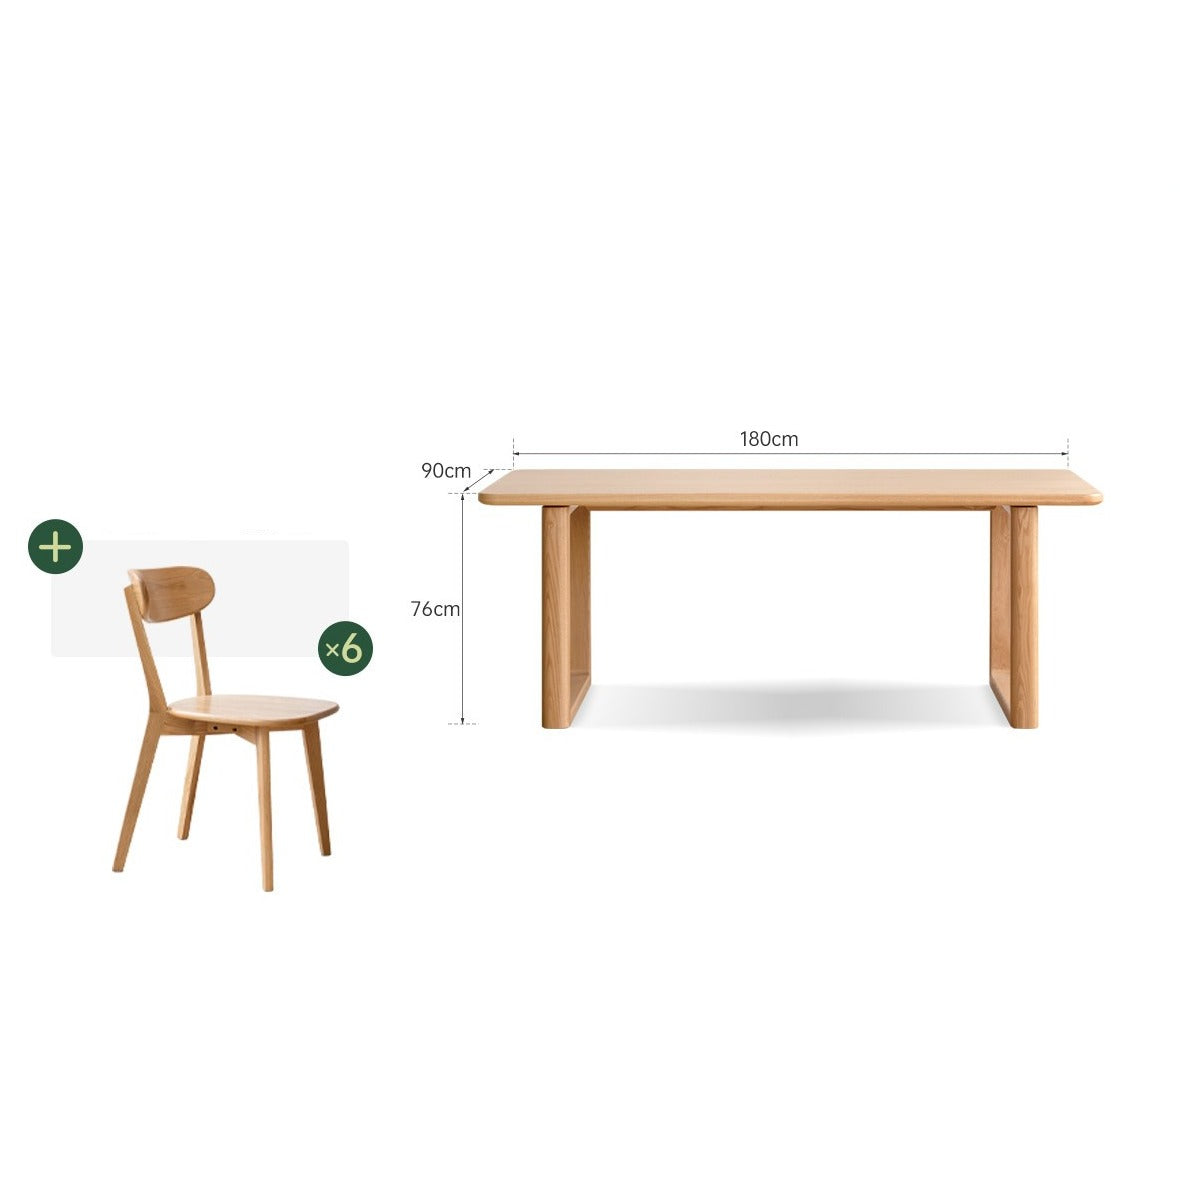 Oak solid wood large plate dining  table